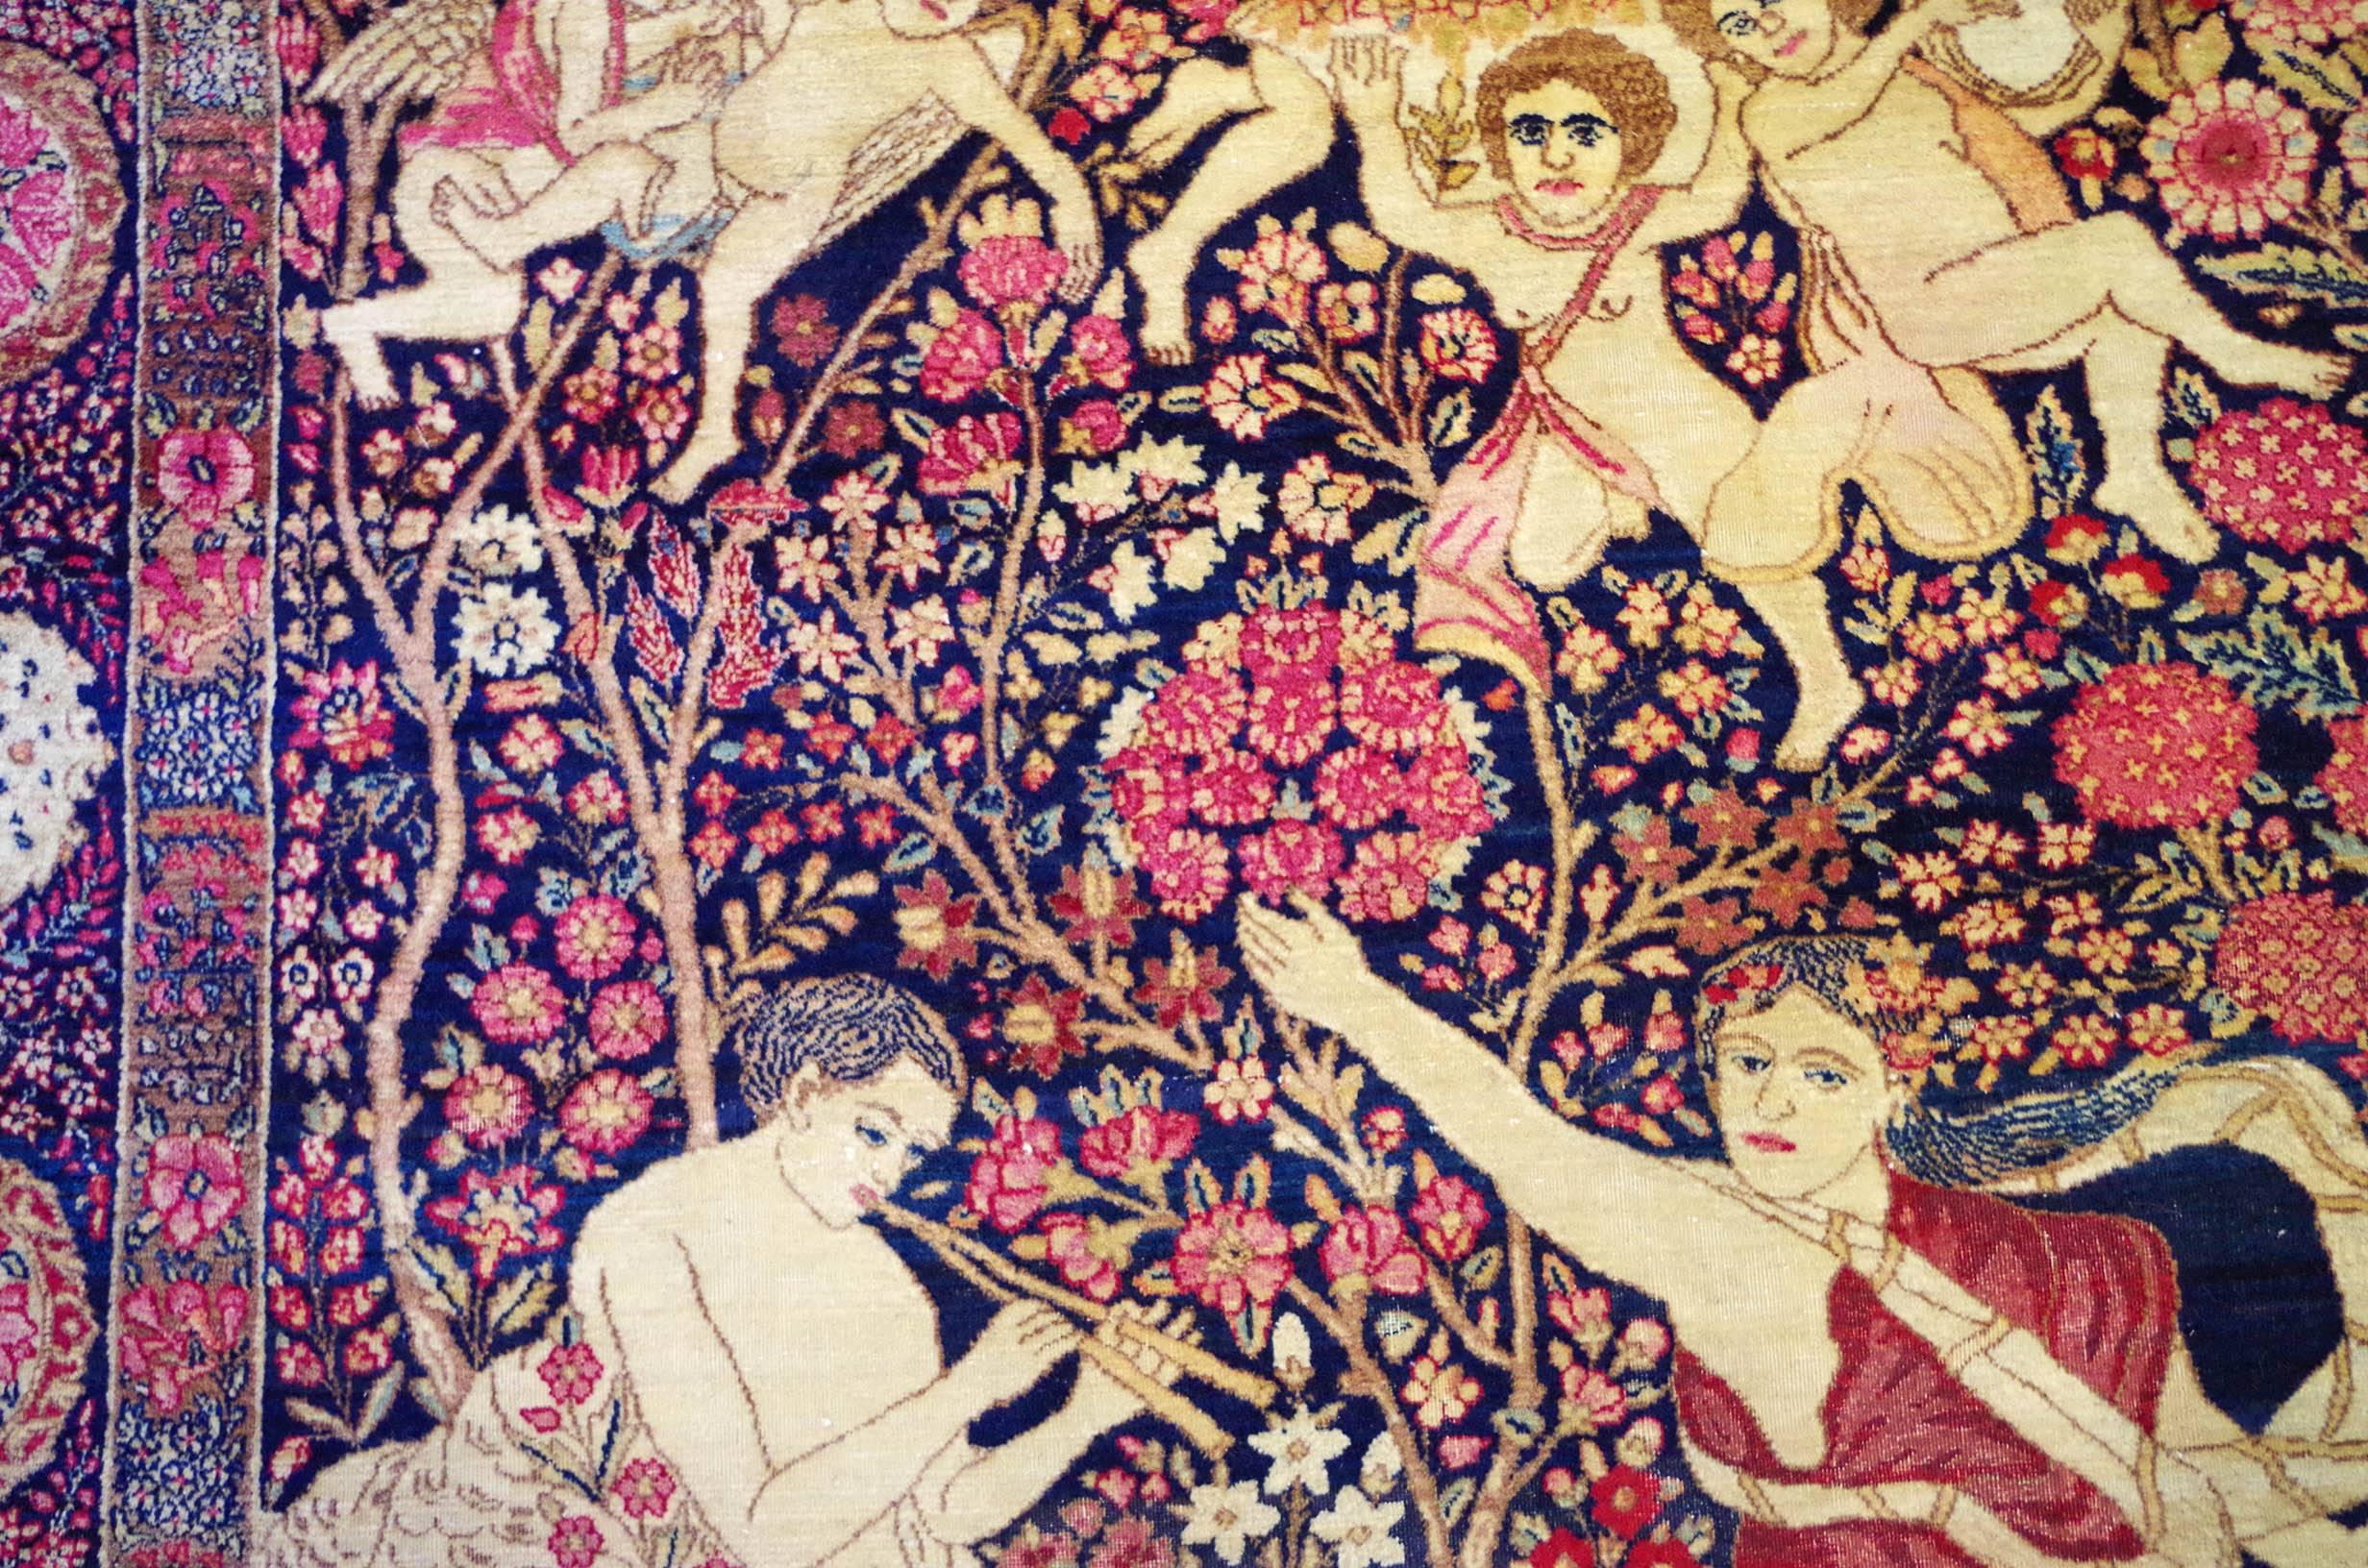 The design of this rug was based on a tapestry depicting the 'Dance of the Nymph' from the series Subjects of the Roman Fables, after Raphael. Nasir al'Din Shah had a copy of this tapestry hanging in the Golestan Palace, presumably providing the